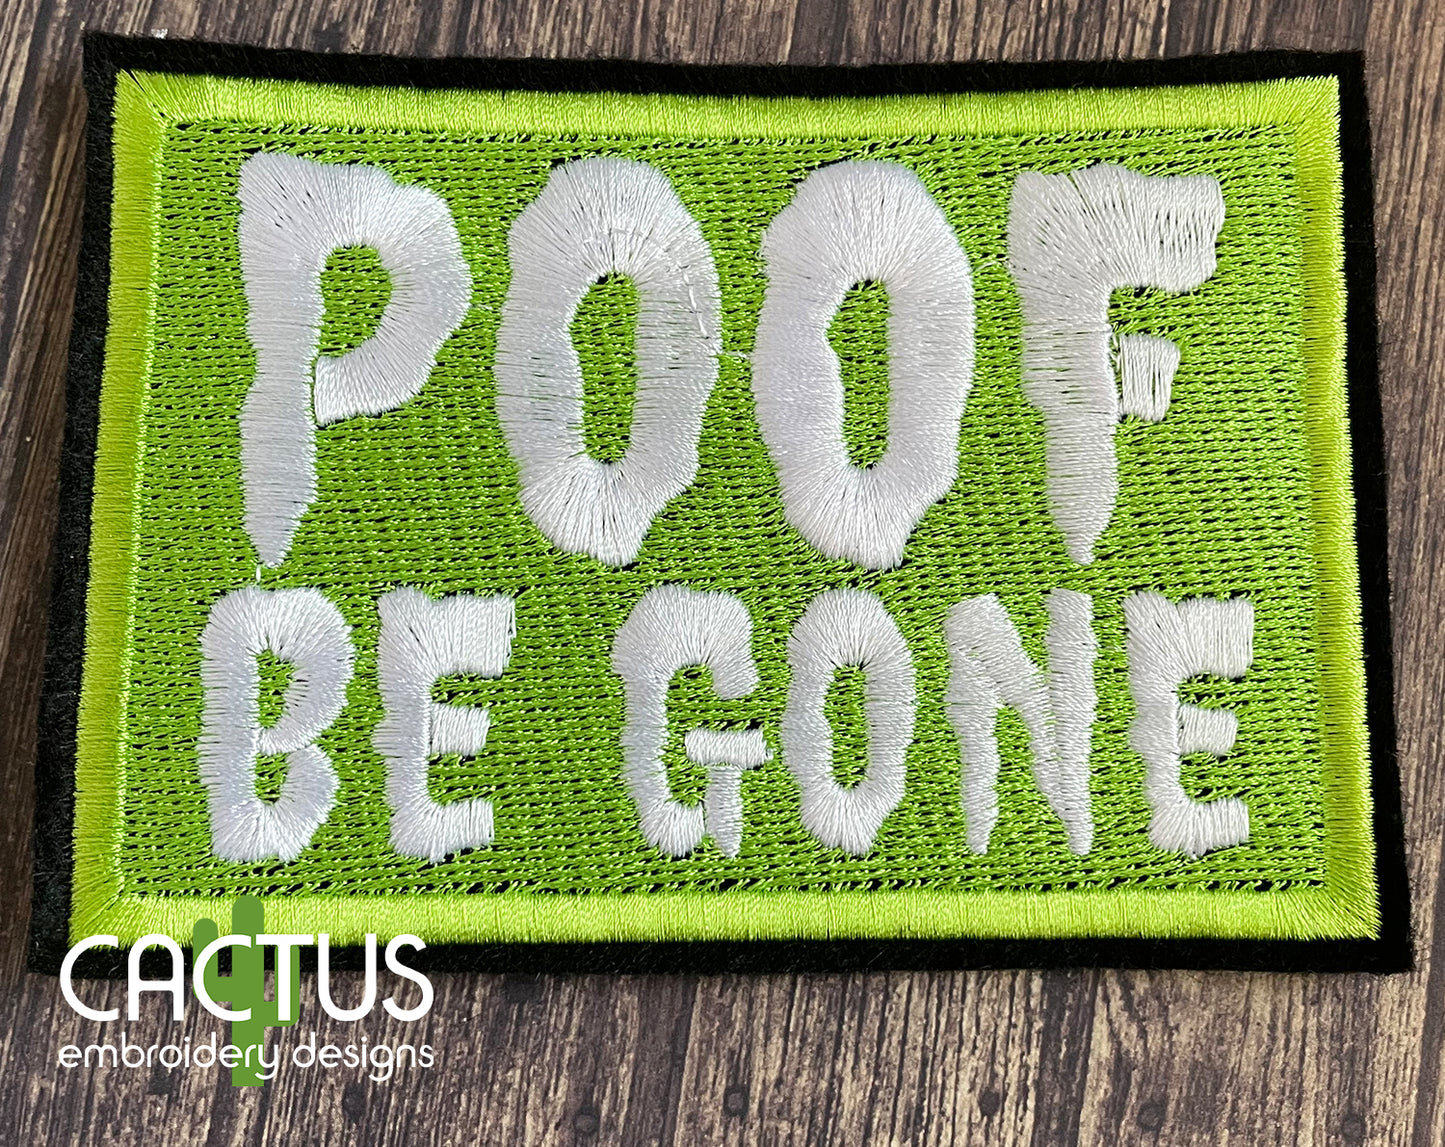 POOF Be Gone Patch & Eyelet Fob Embroidery Design